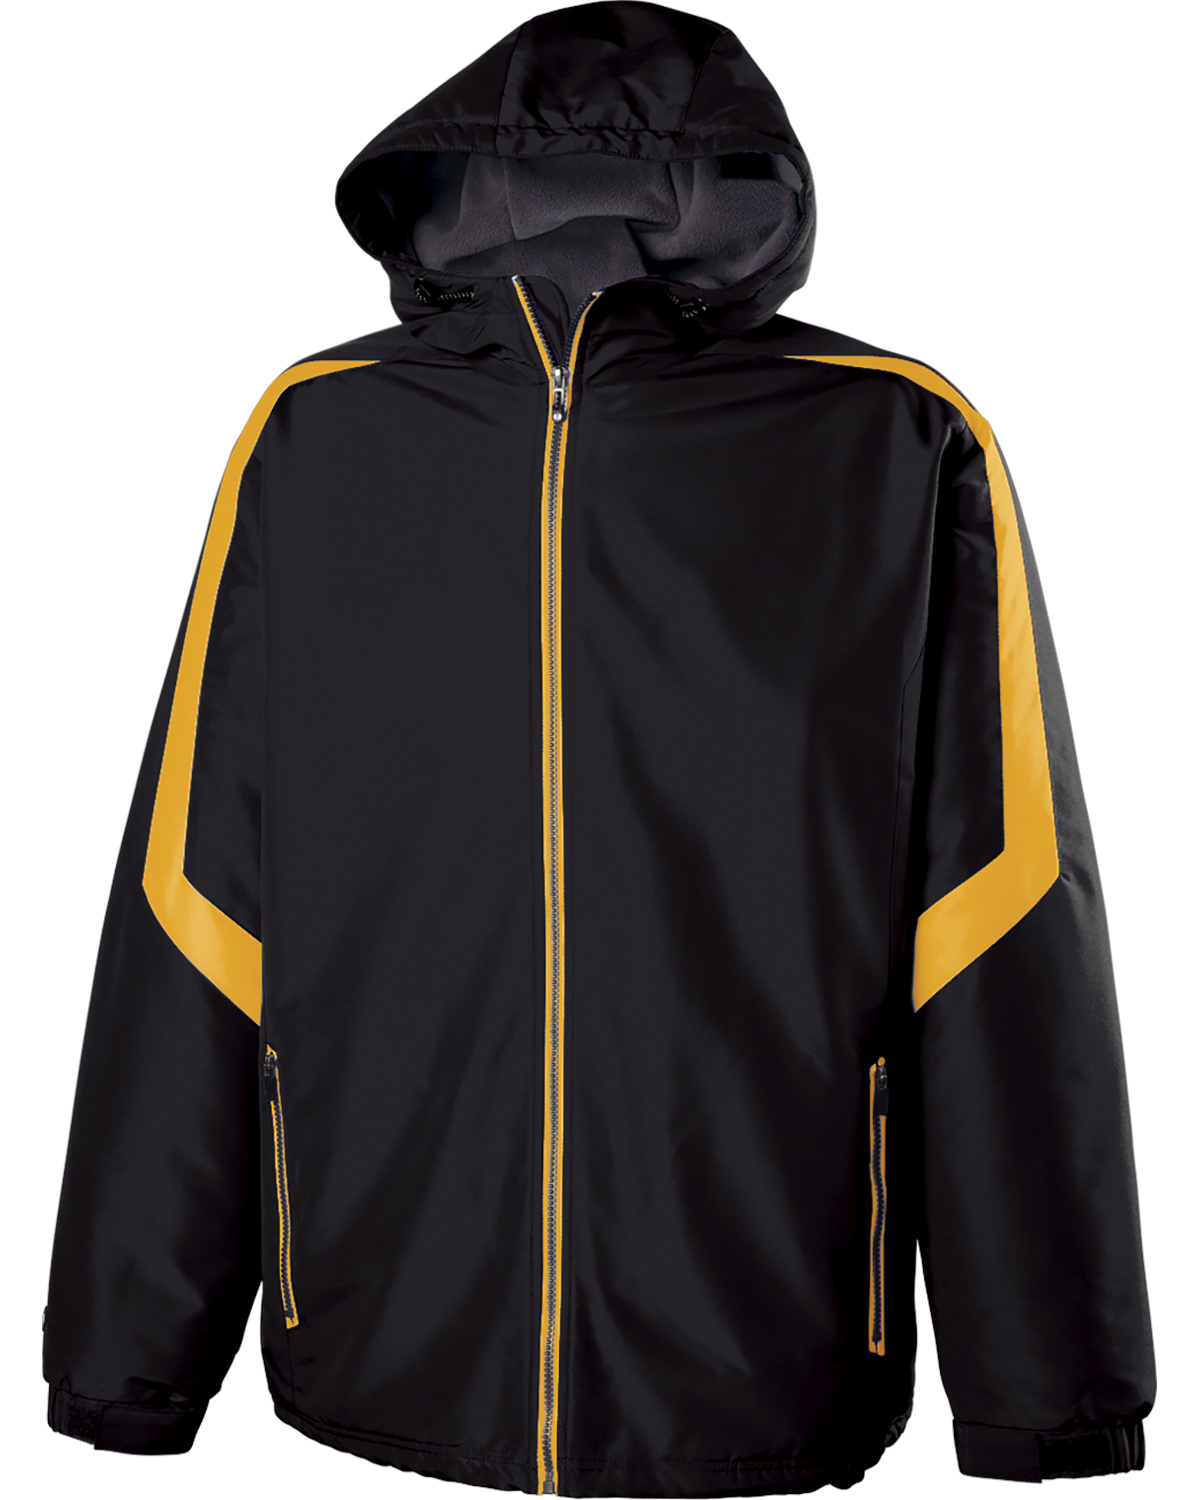 Holloway 229059 - Adult Polyester Full Zip Charger Jacket